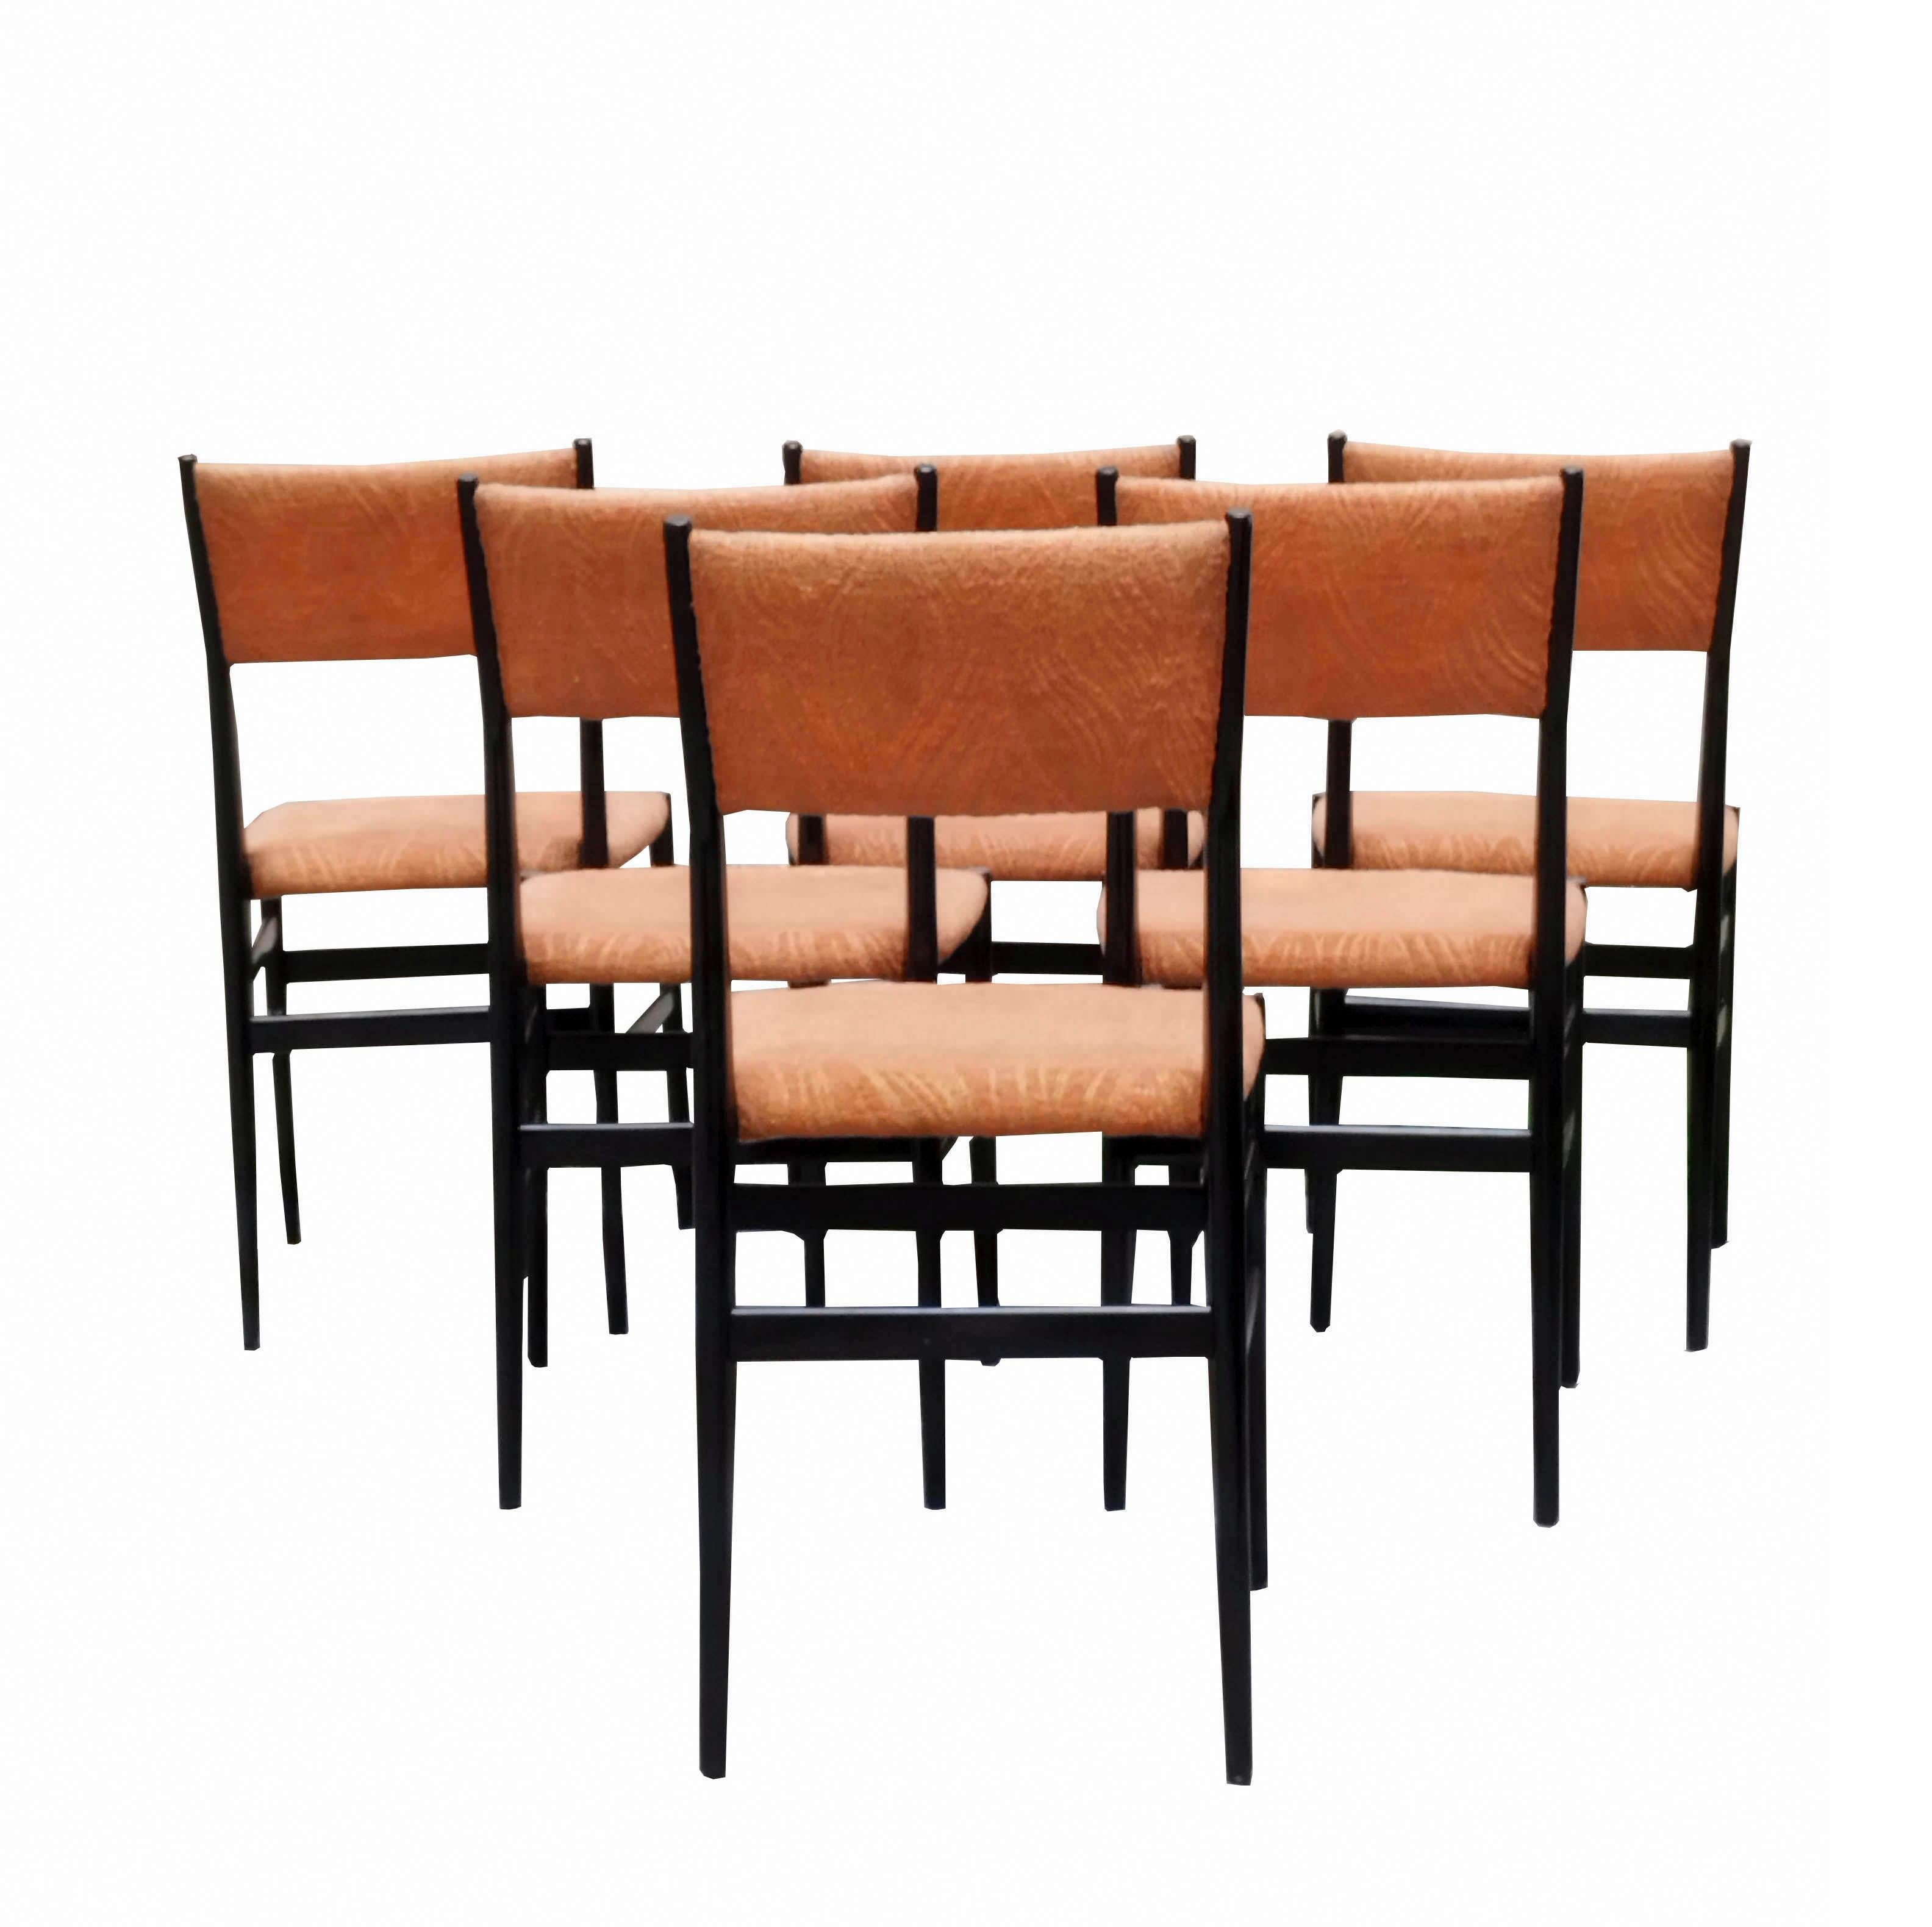 Mid-Century Modern Gio Ponti for Cassina Set of 6 Leggera Chairs, Italy, 1950s For Sale